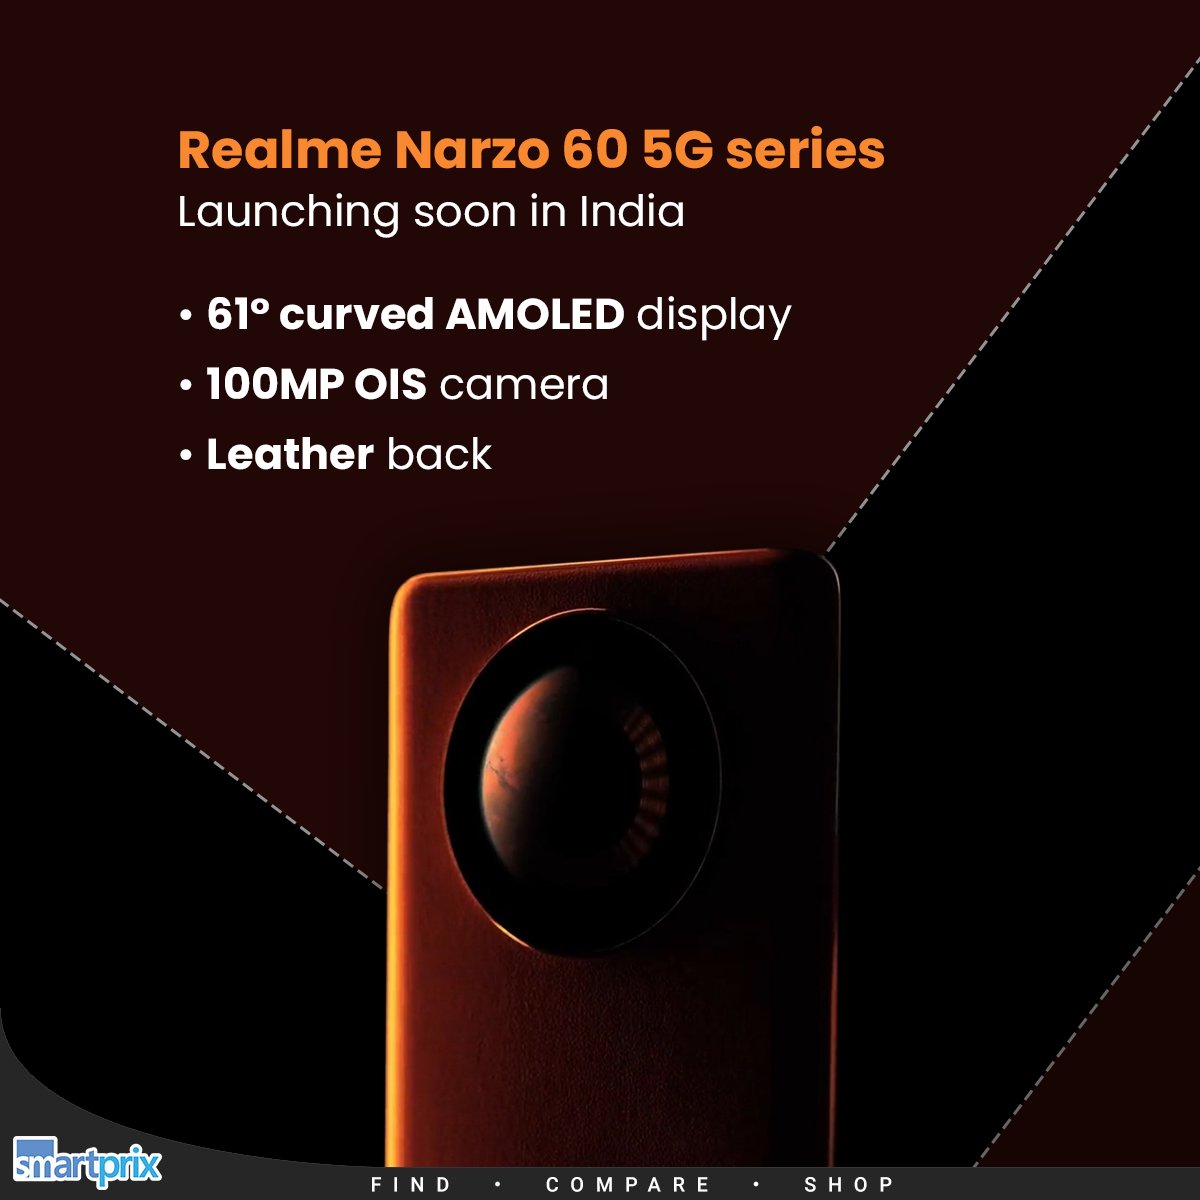 The next Narzo phone is coming... Rebranded Realme 11 Pro? 

#Realme #RealmeNarzo60 #Realme11Pro